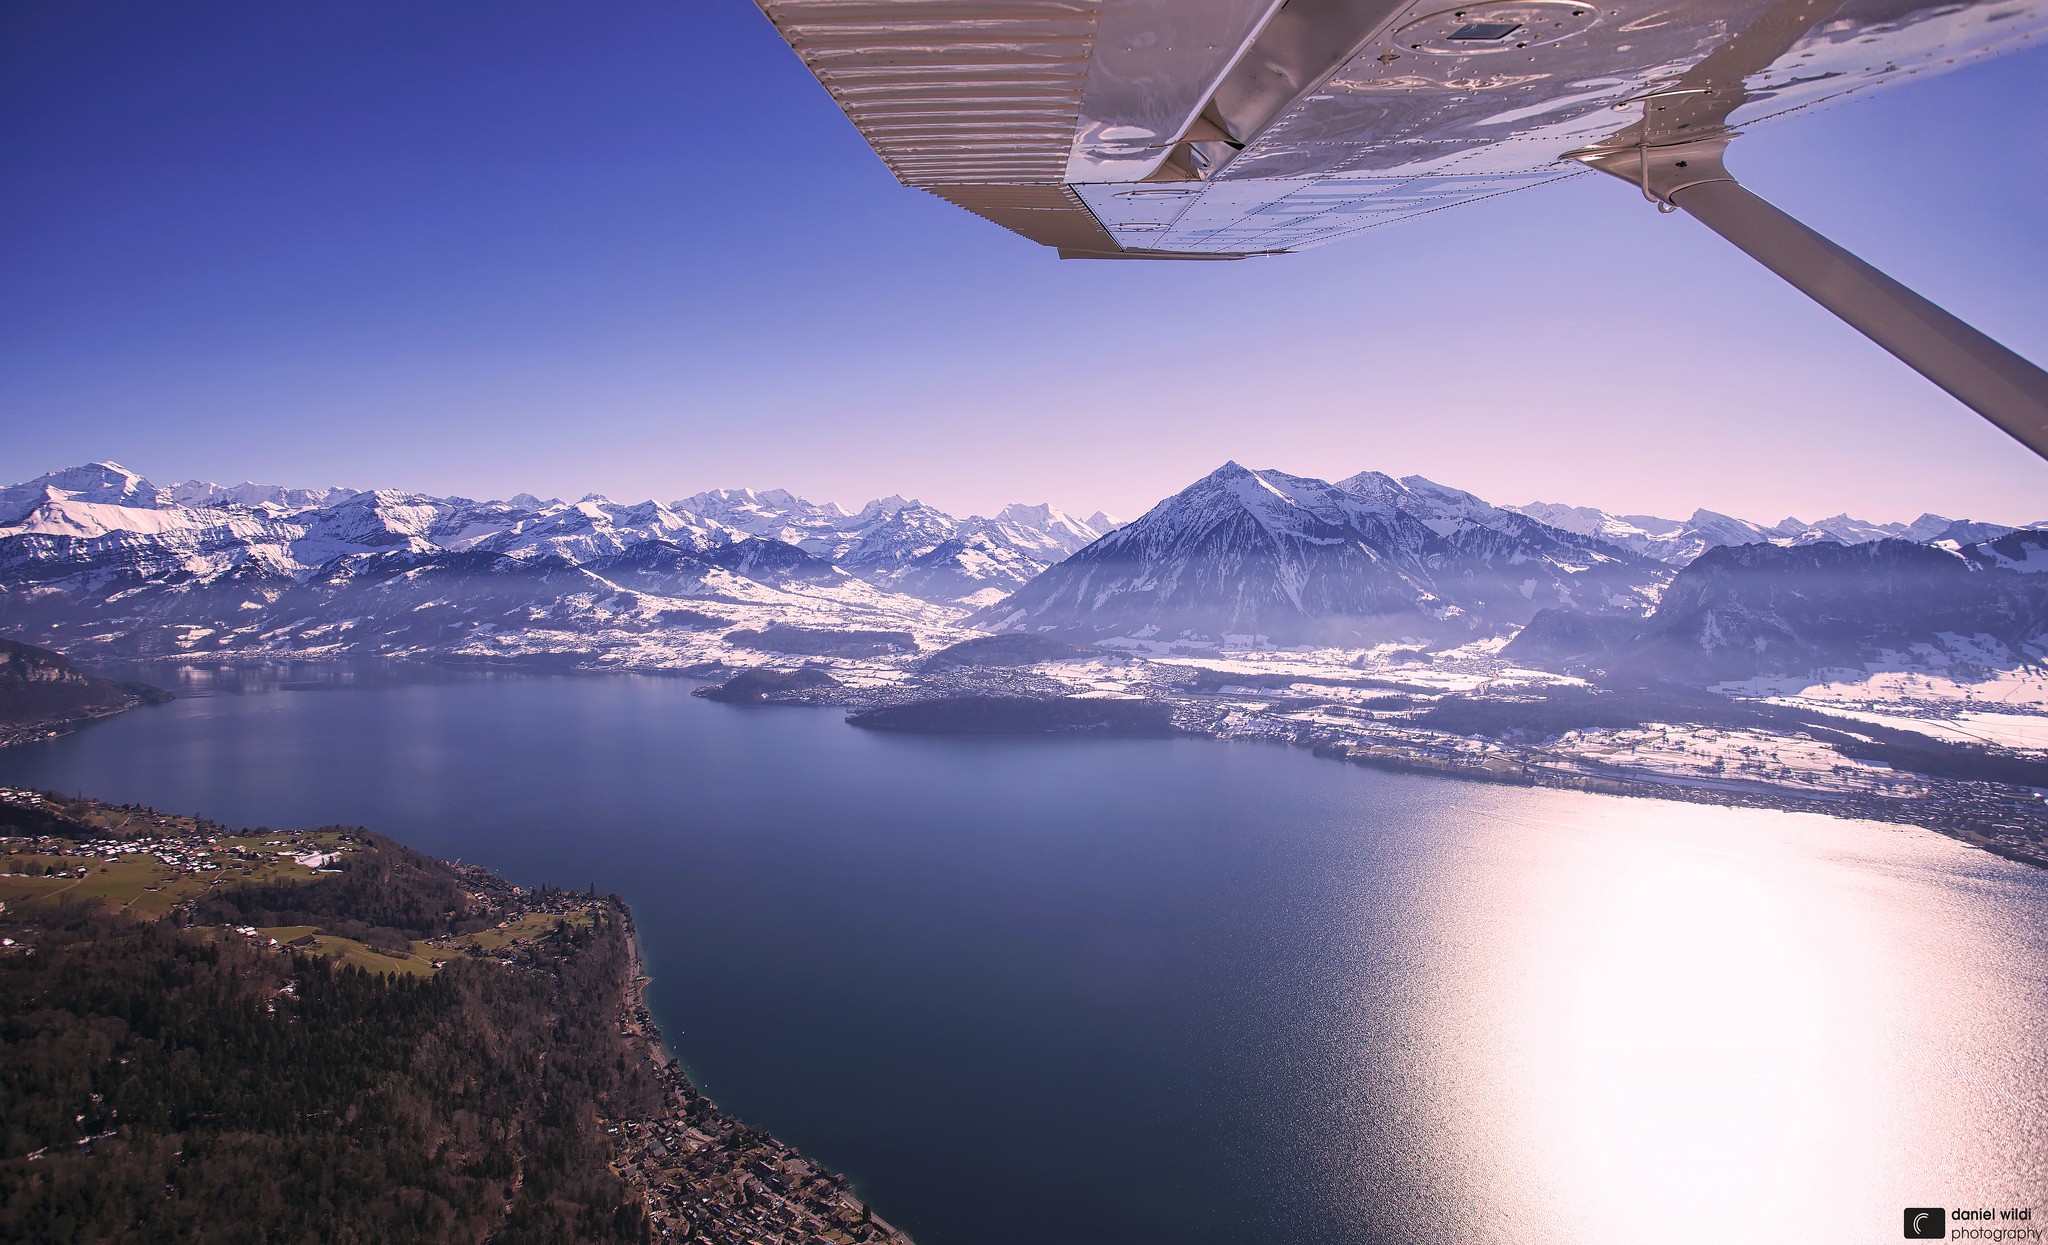 General 2048x1245 mountains aircraft landscape nature panorama snowy peak vehicle lake water aerial view